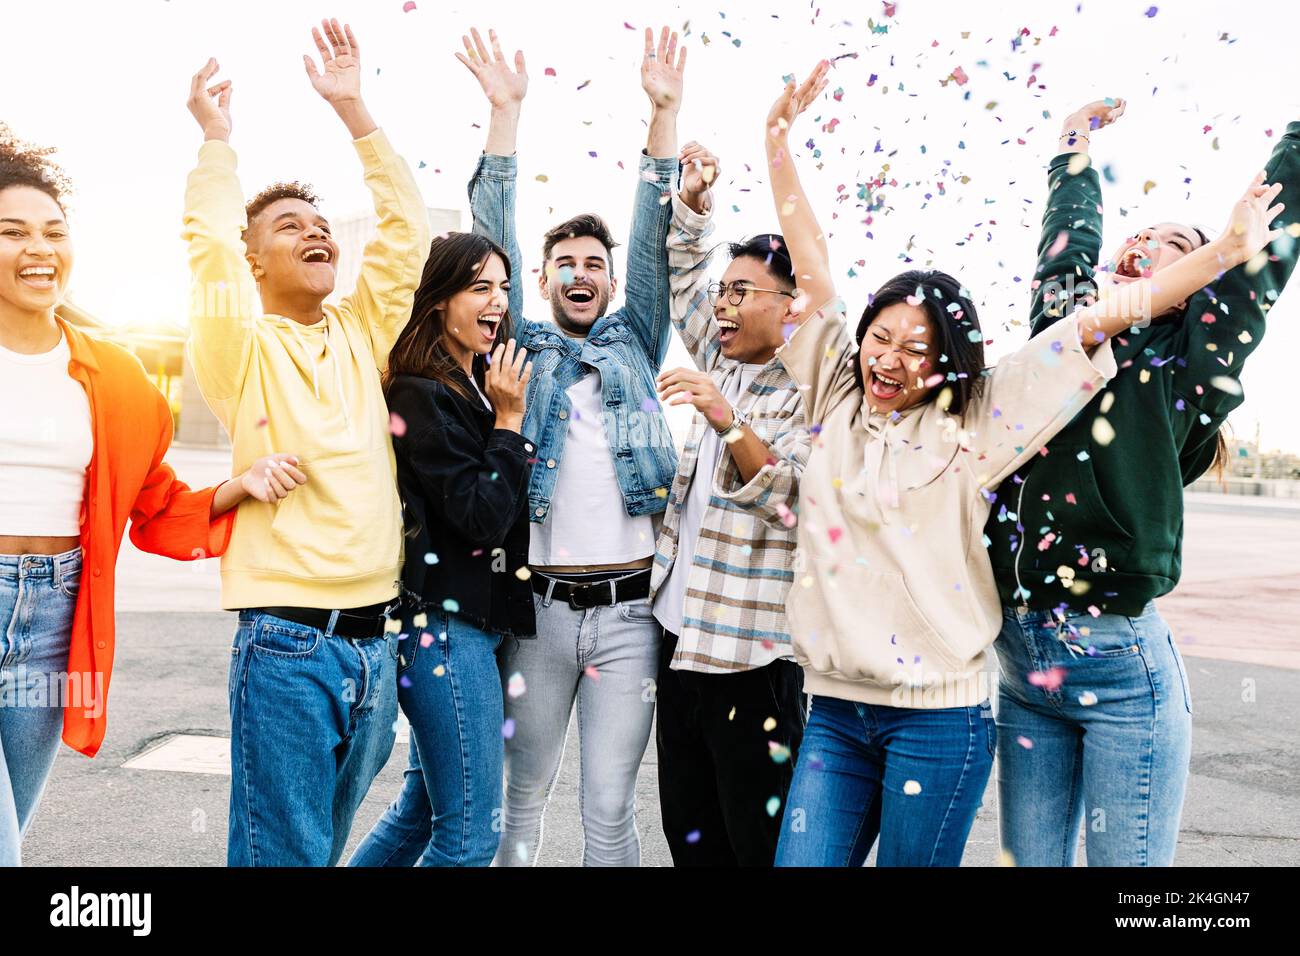 Group of diverse young friends celebrating together throwing confetti at party Stock Photo